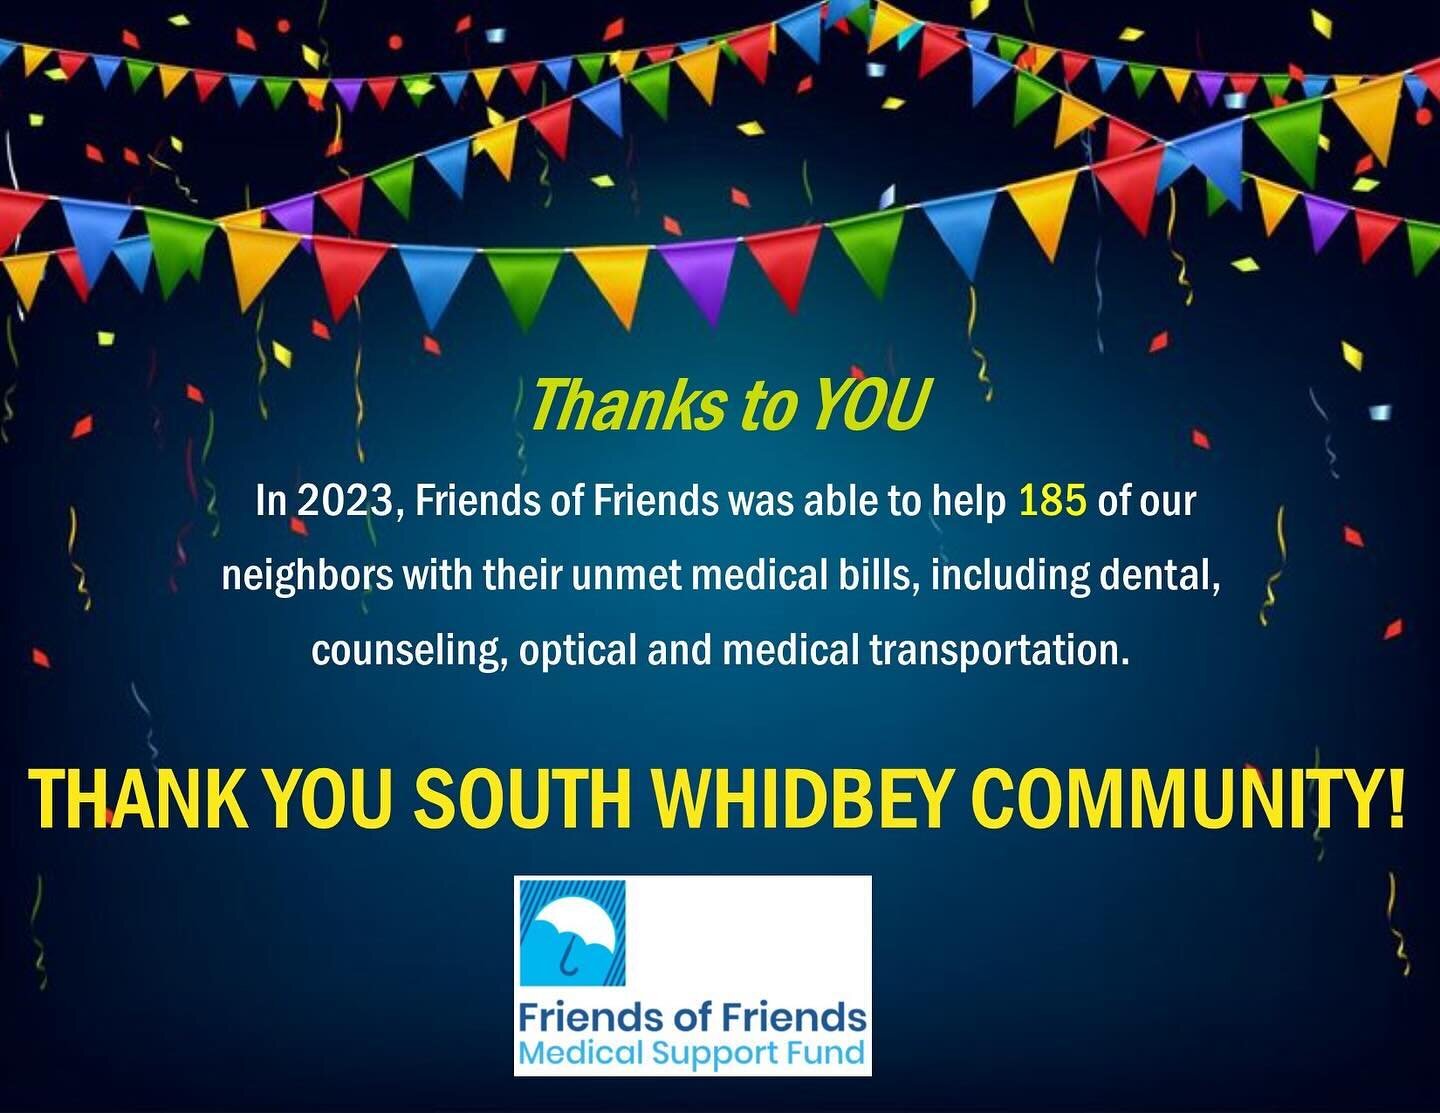 What a wonderful generous community that we live in! We are a healthier place because we care about our neighbors. Thank you everyone for your support of Friends of Friends.